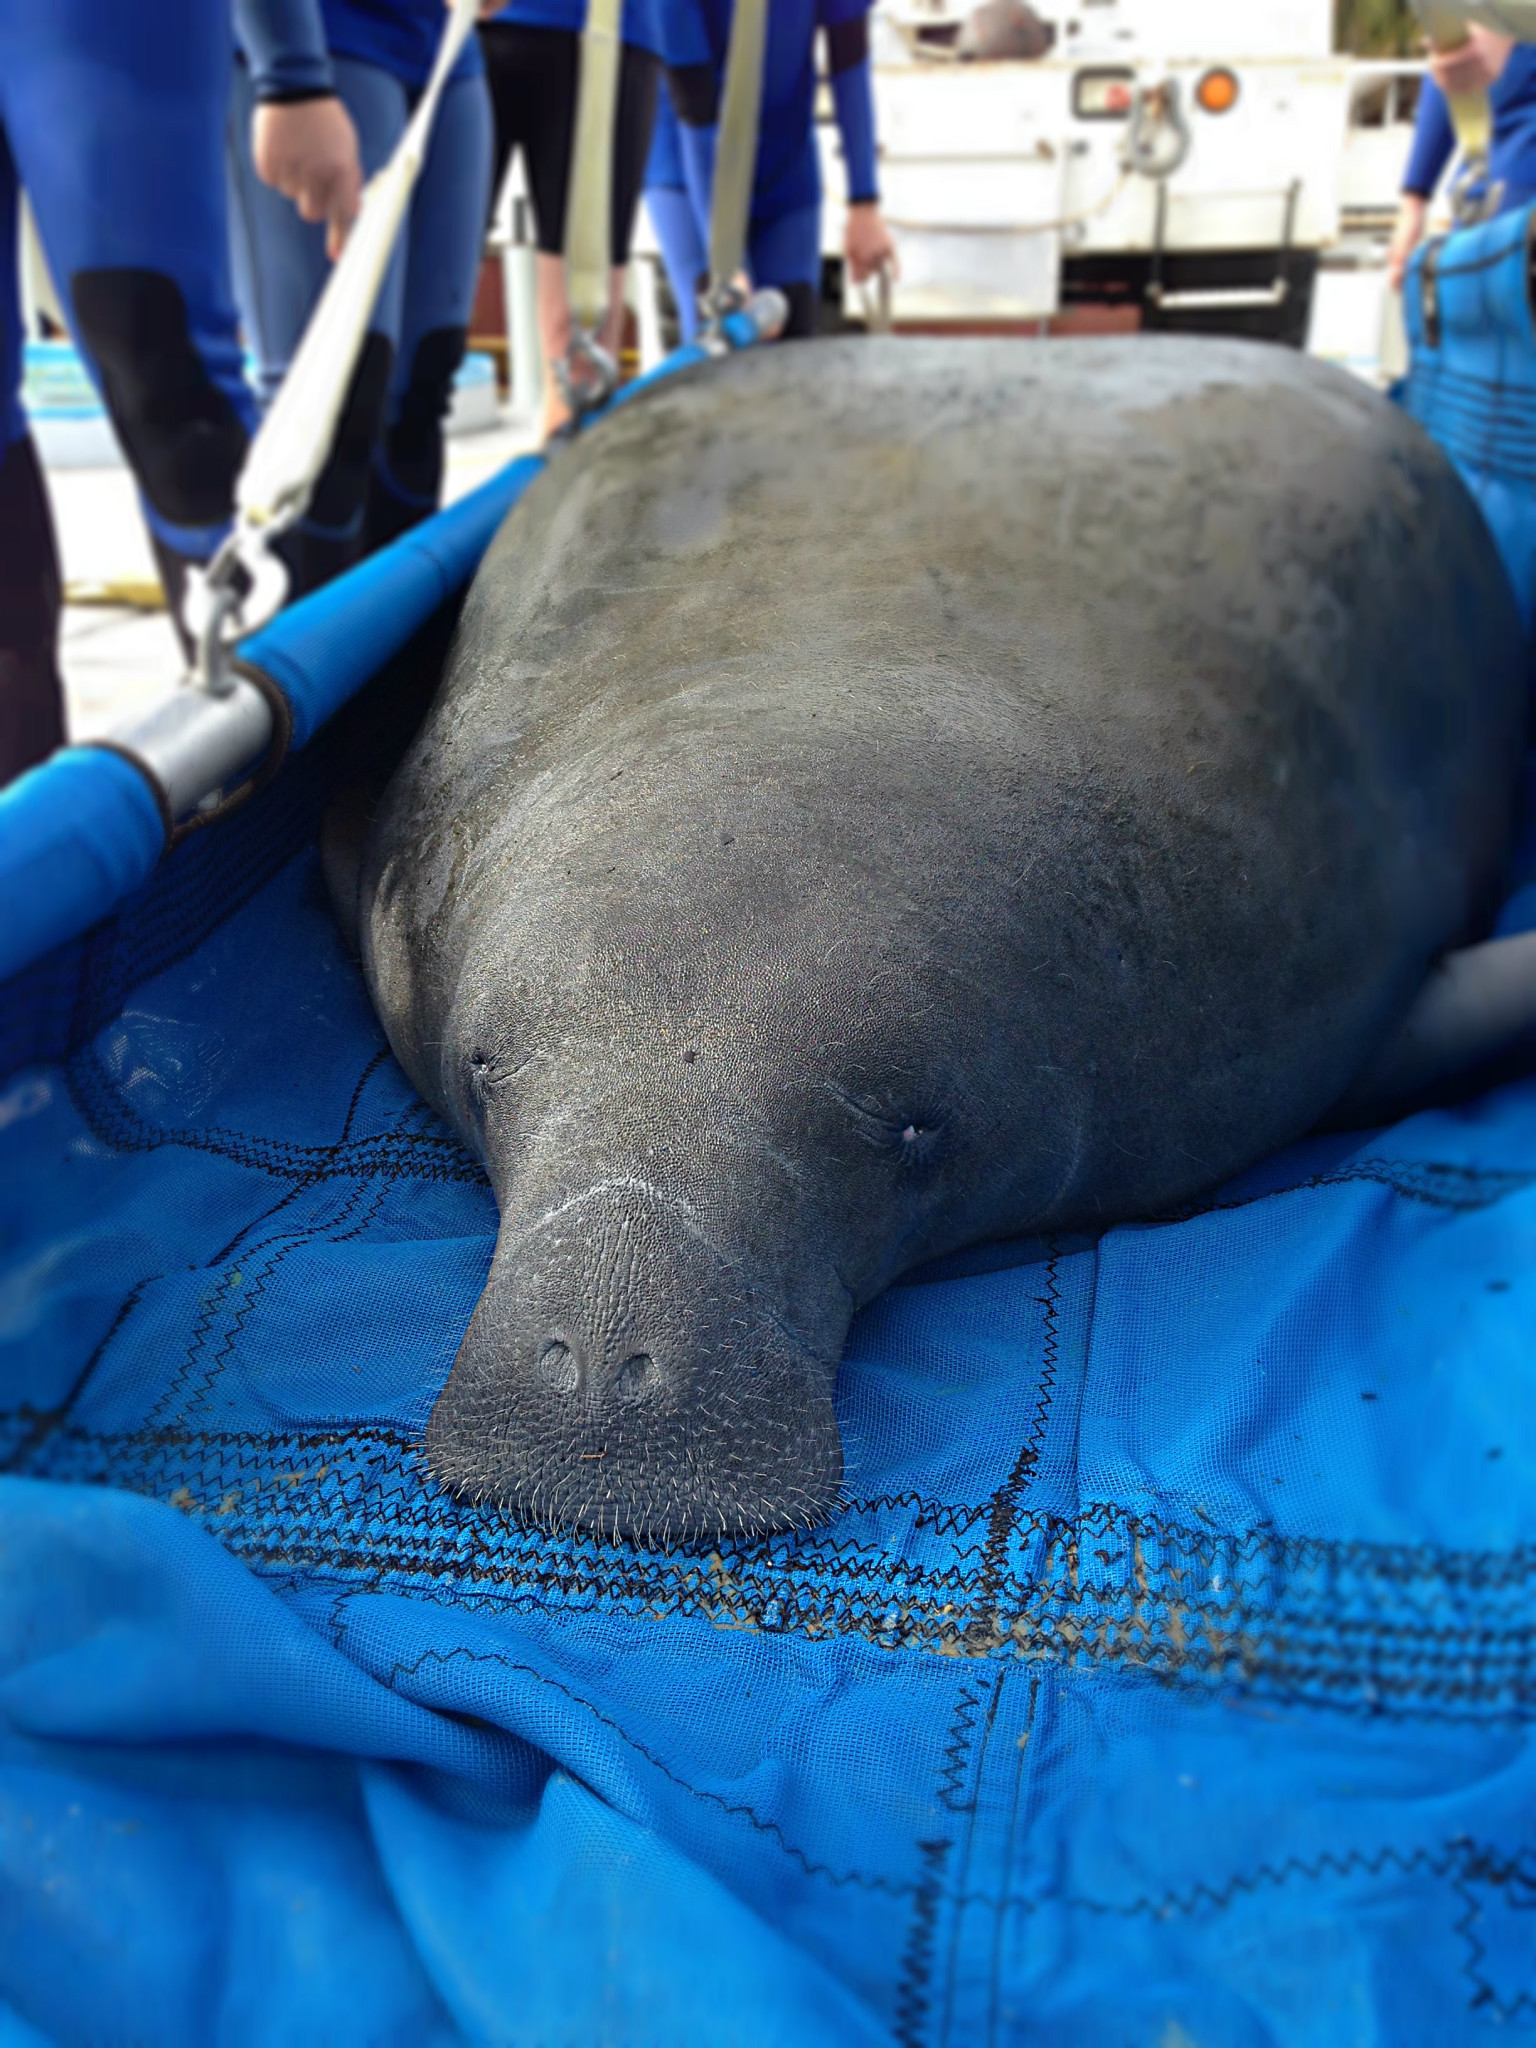 SeaWorld Returns First Manatee of the year, Begins Care for Two More